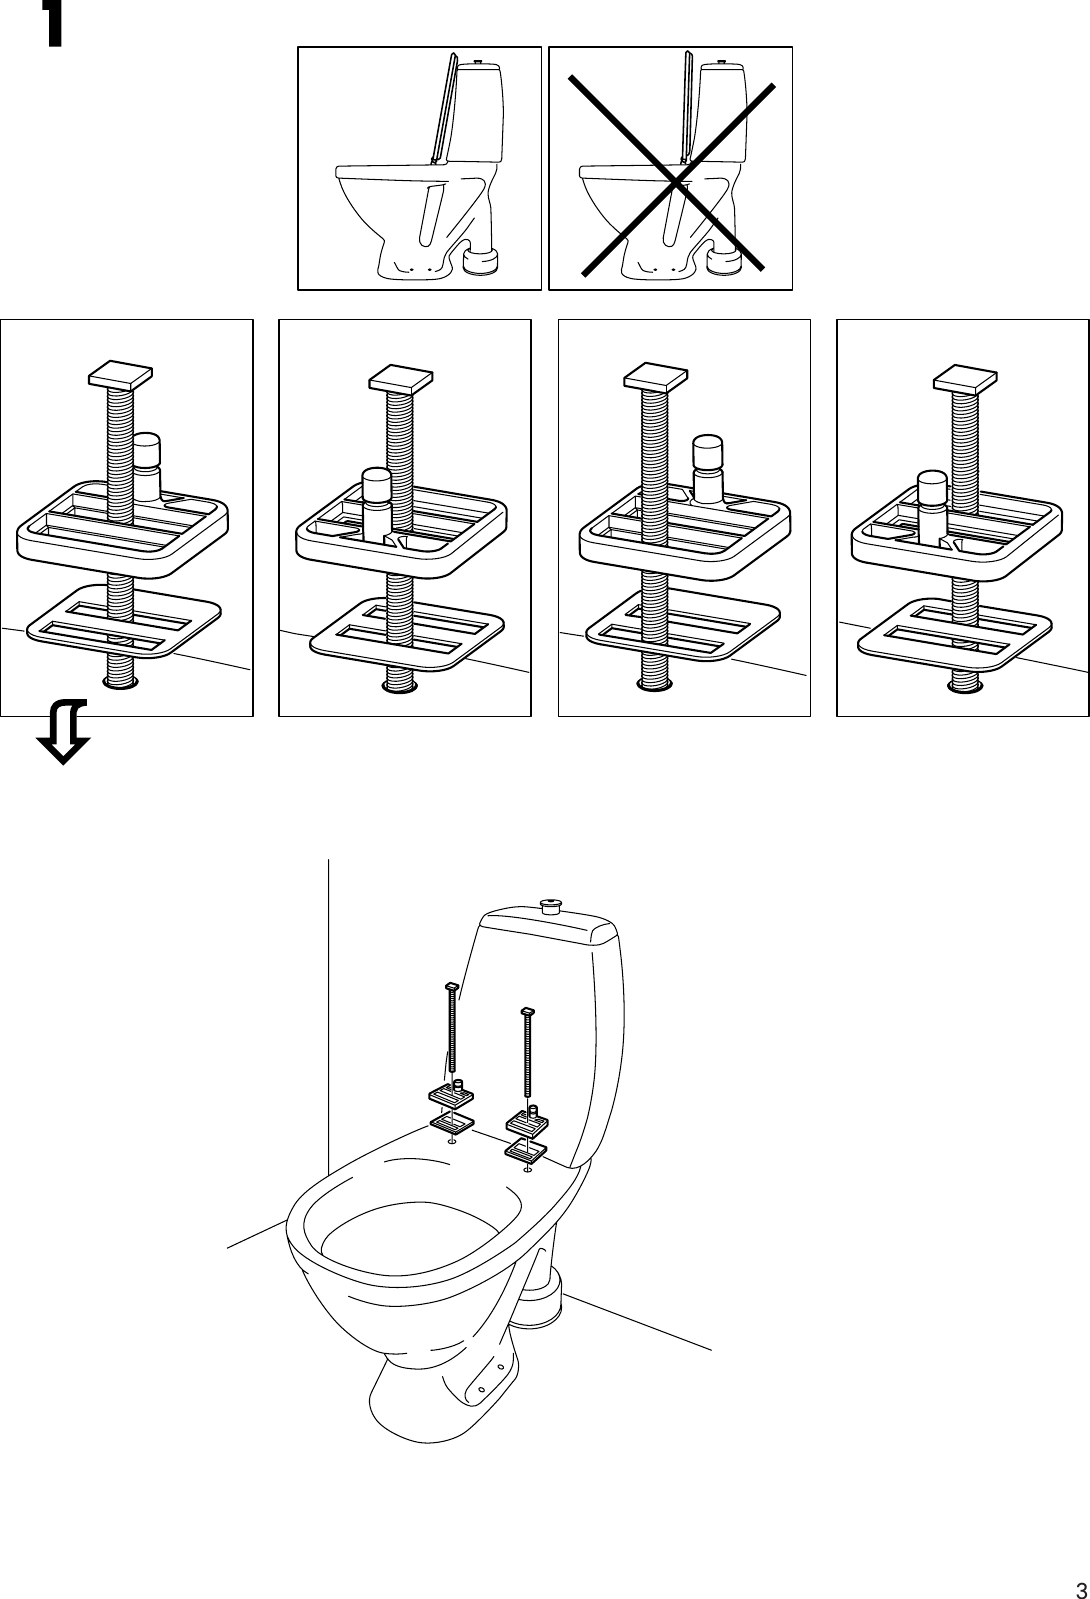 Page 3 of 8 - Ikea Ikea-Freden-Toilet-Seat-Assembly-Instruction